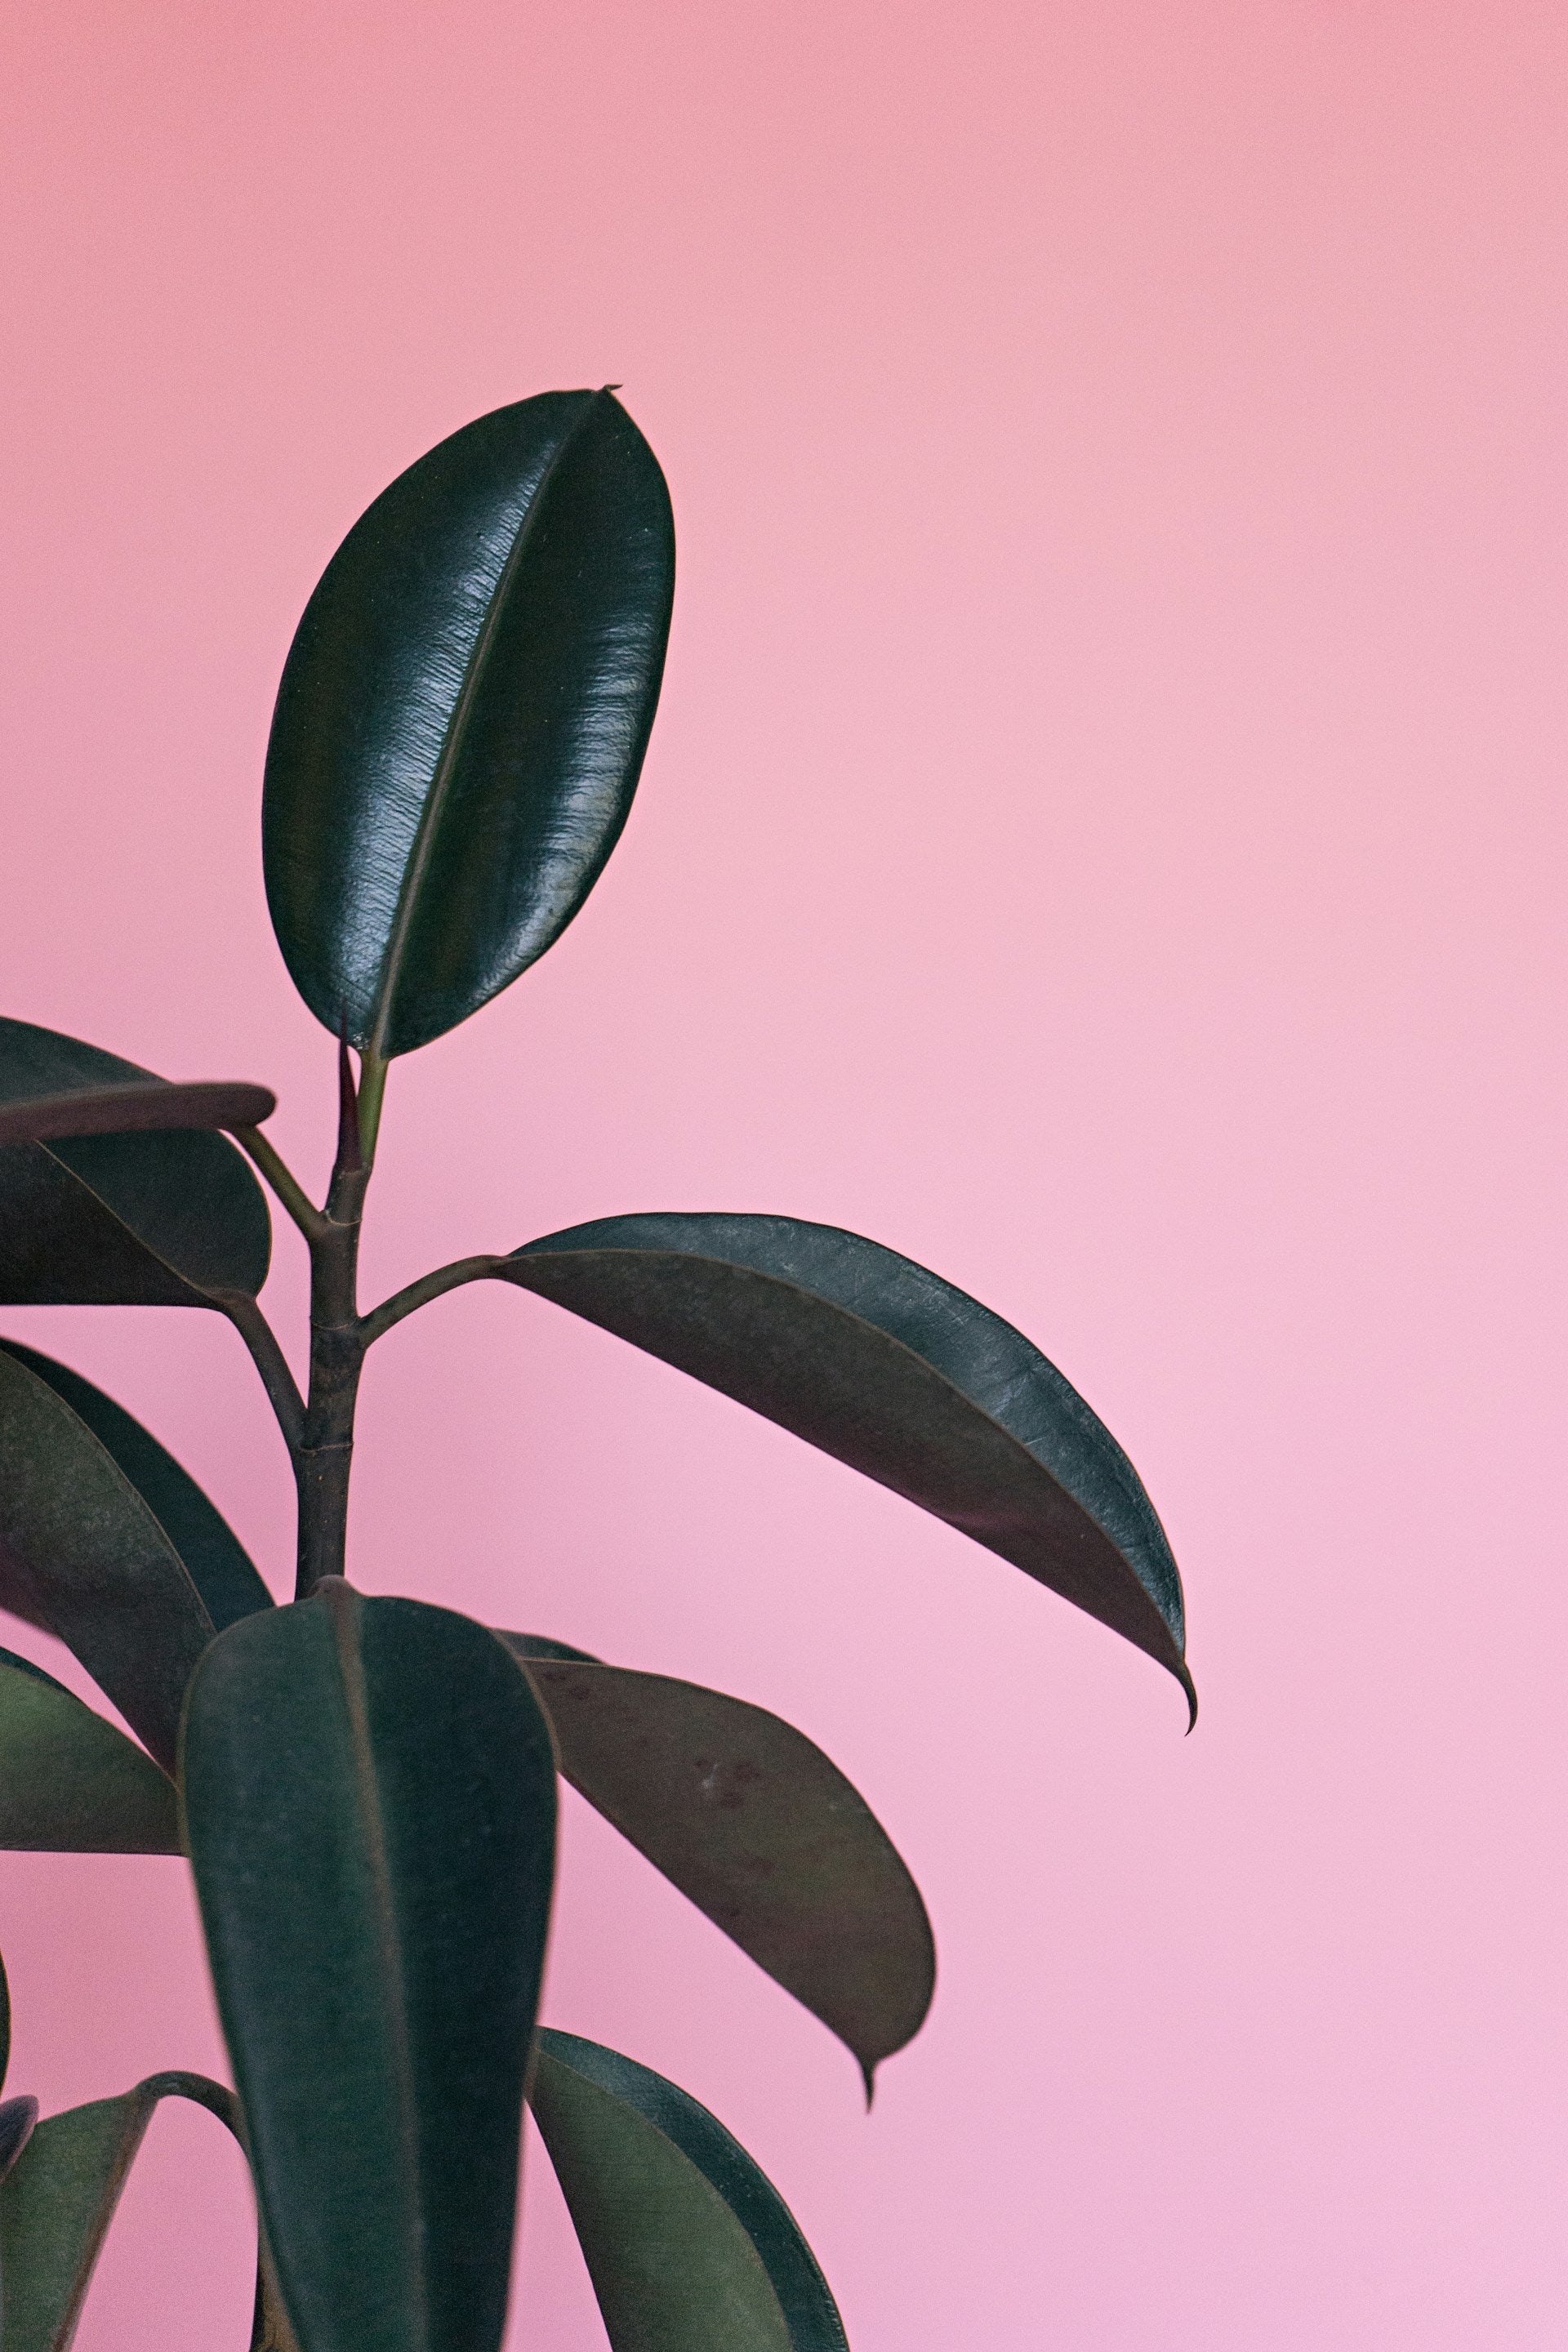 A mature rubber plant with only the leaves visible against a pink backdrop